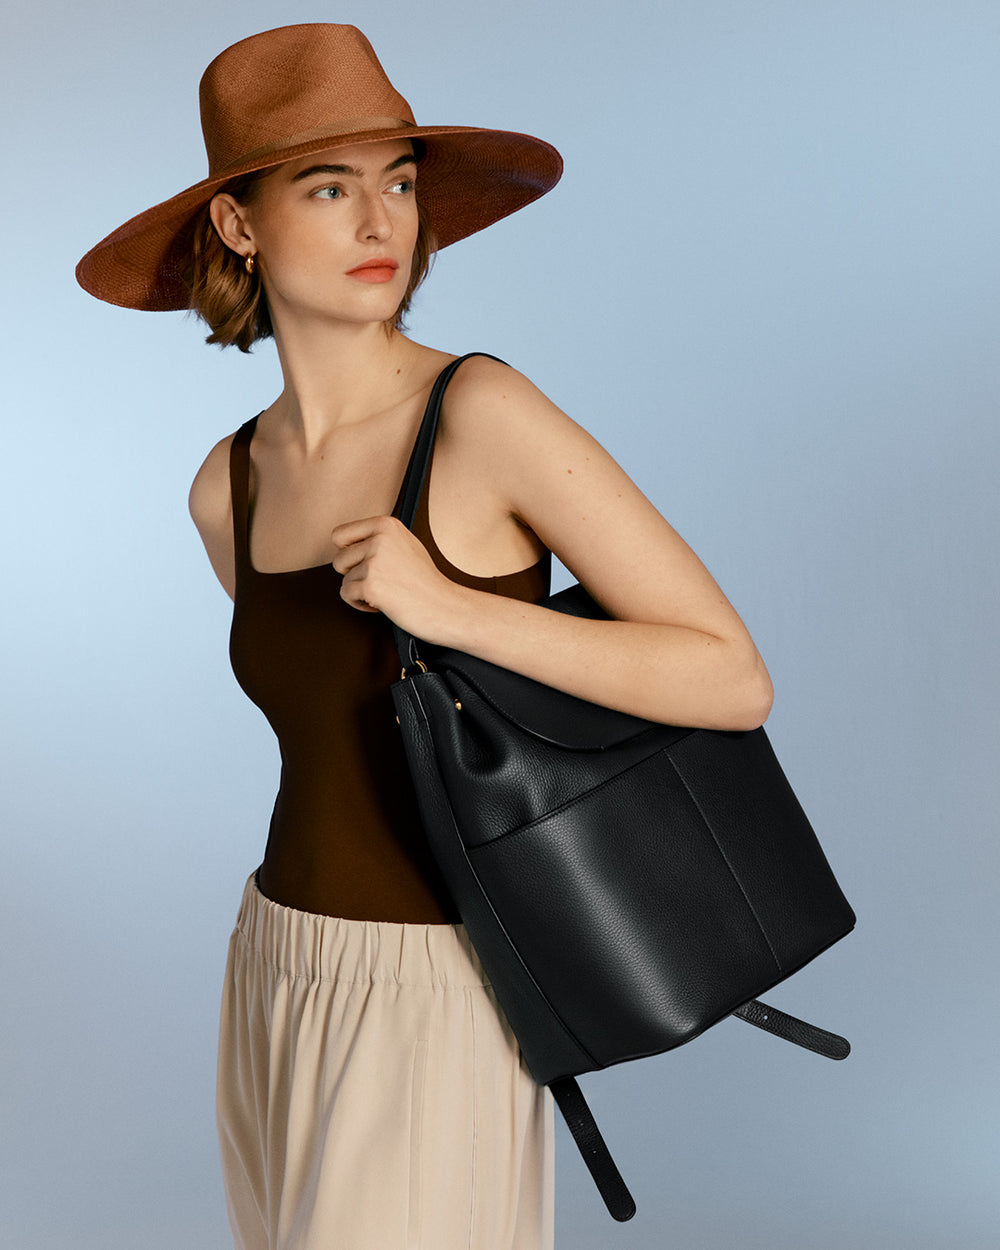 Woman in a hat with a large bag looking to the side